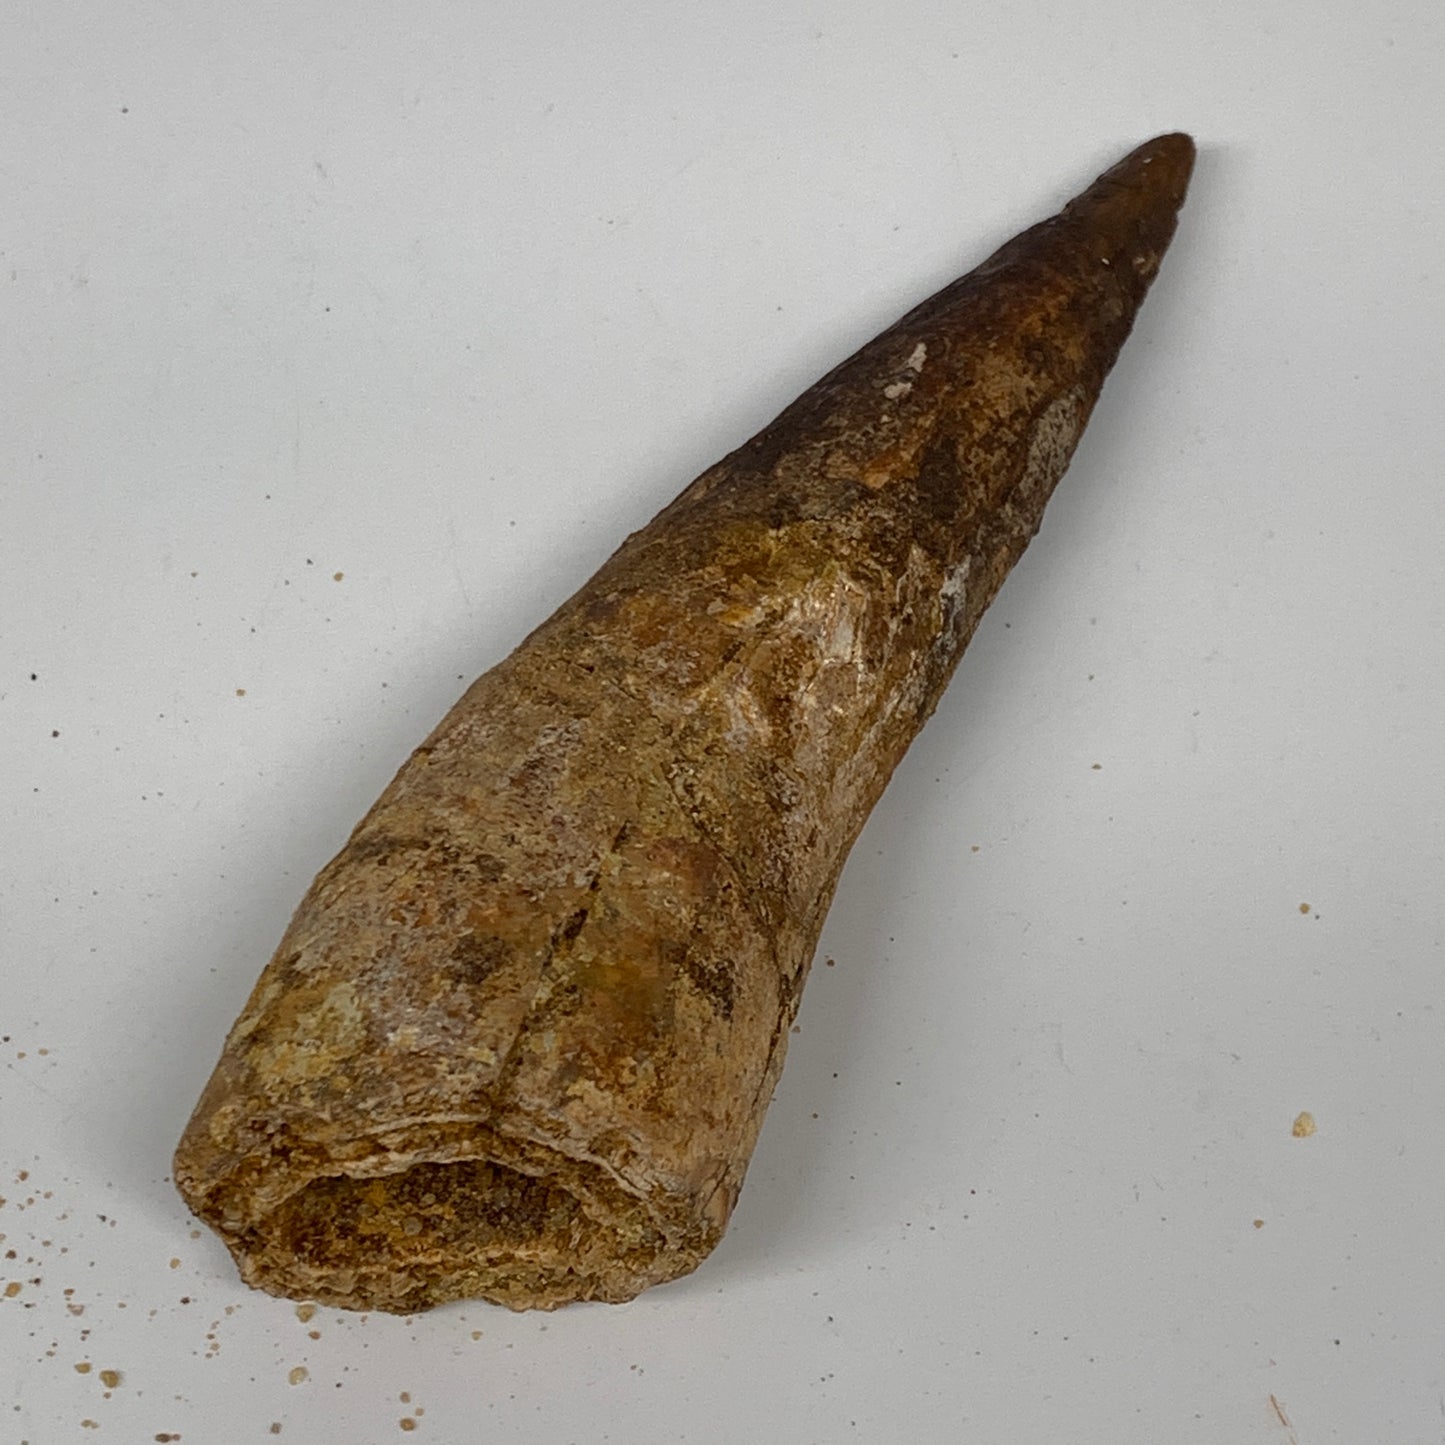 93.1g, 5"X1.4"x 1.2", Rare Natural Fossils Spinosaurus Tooth from Morocco, F3168